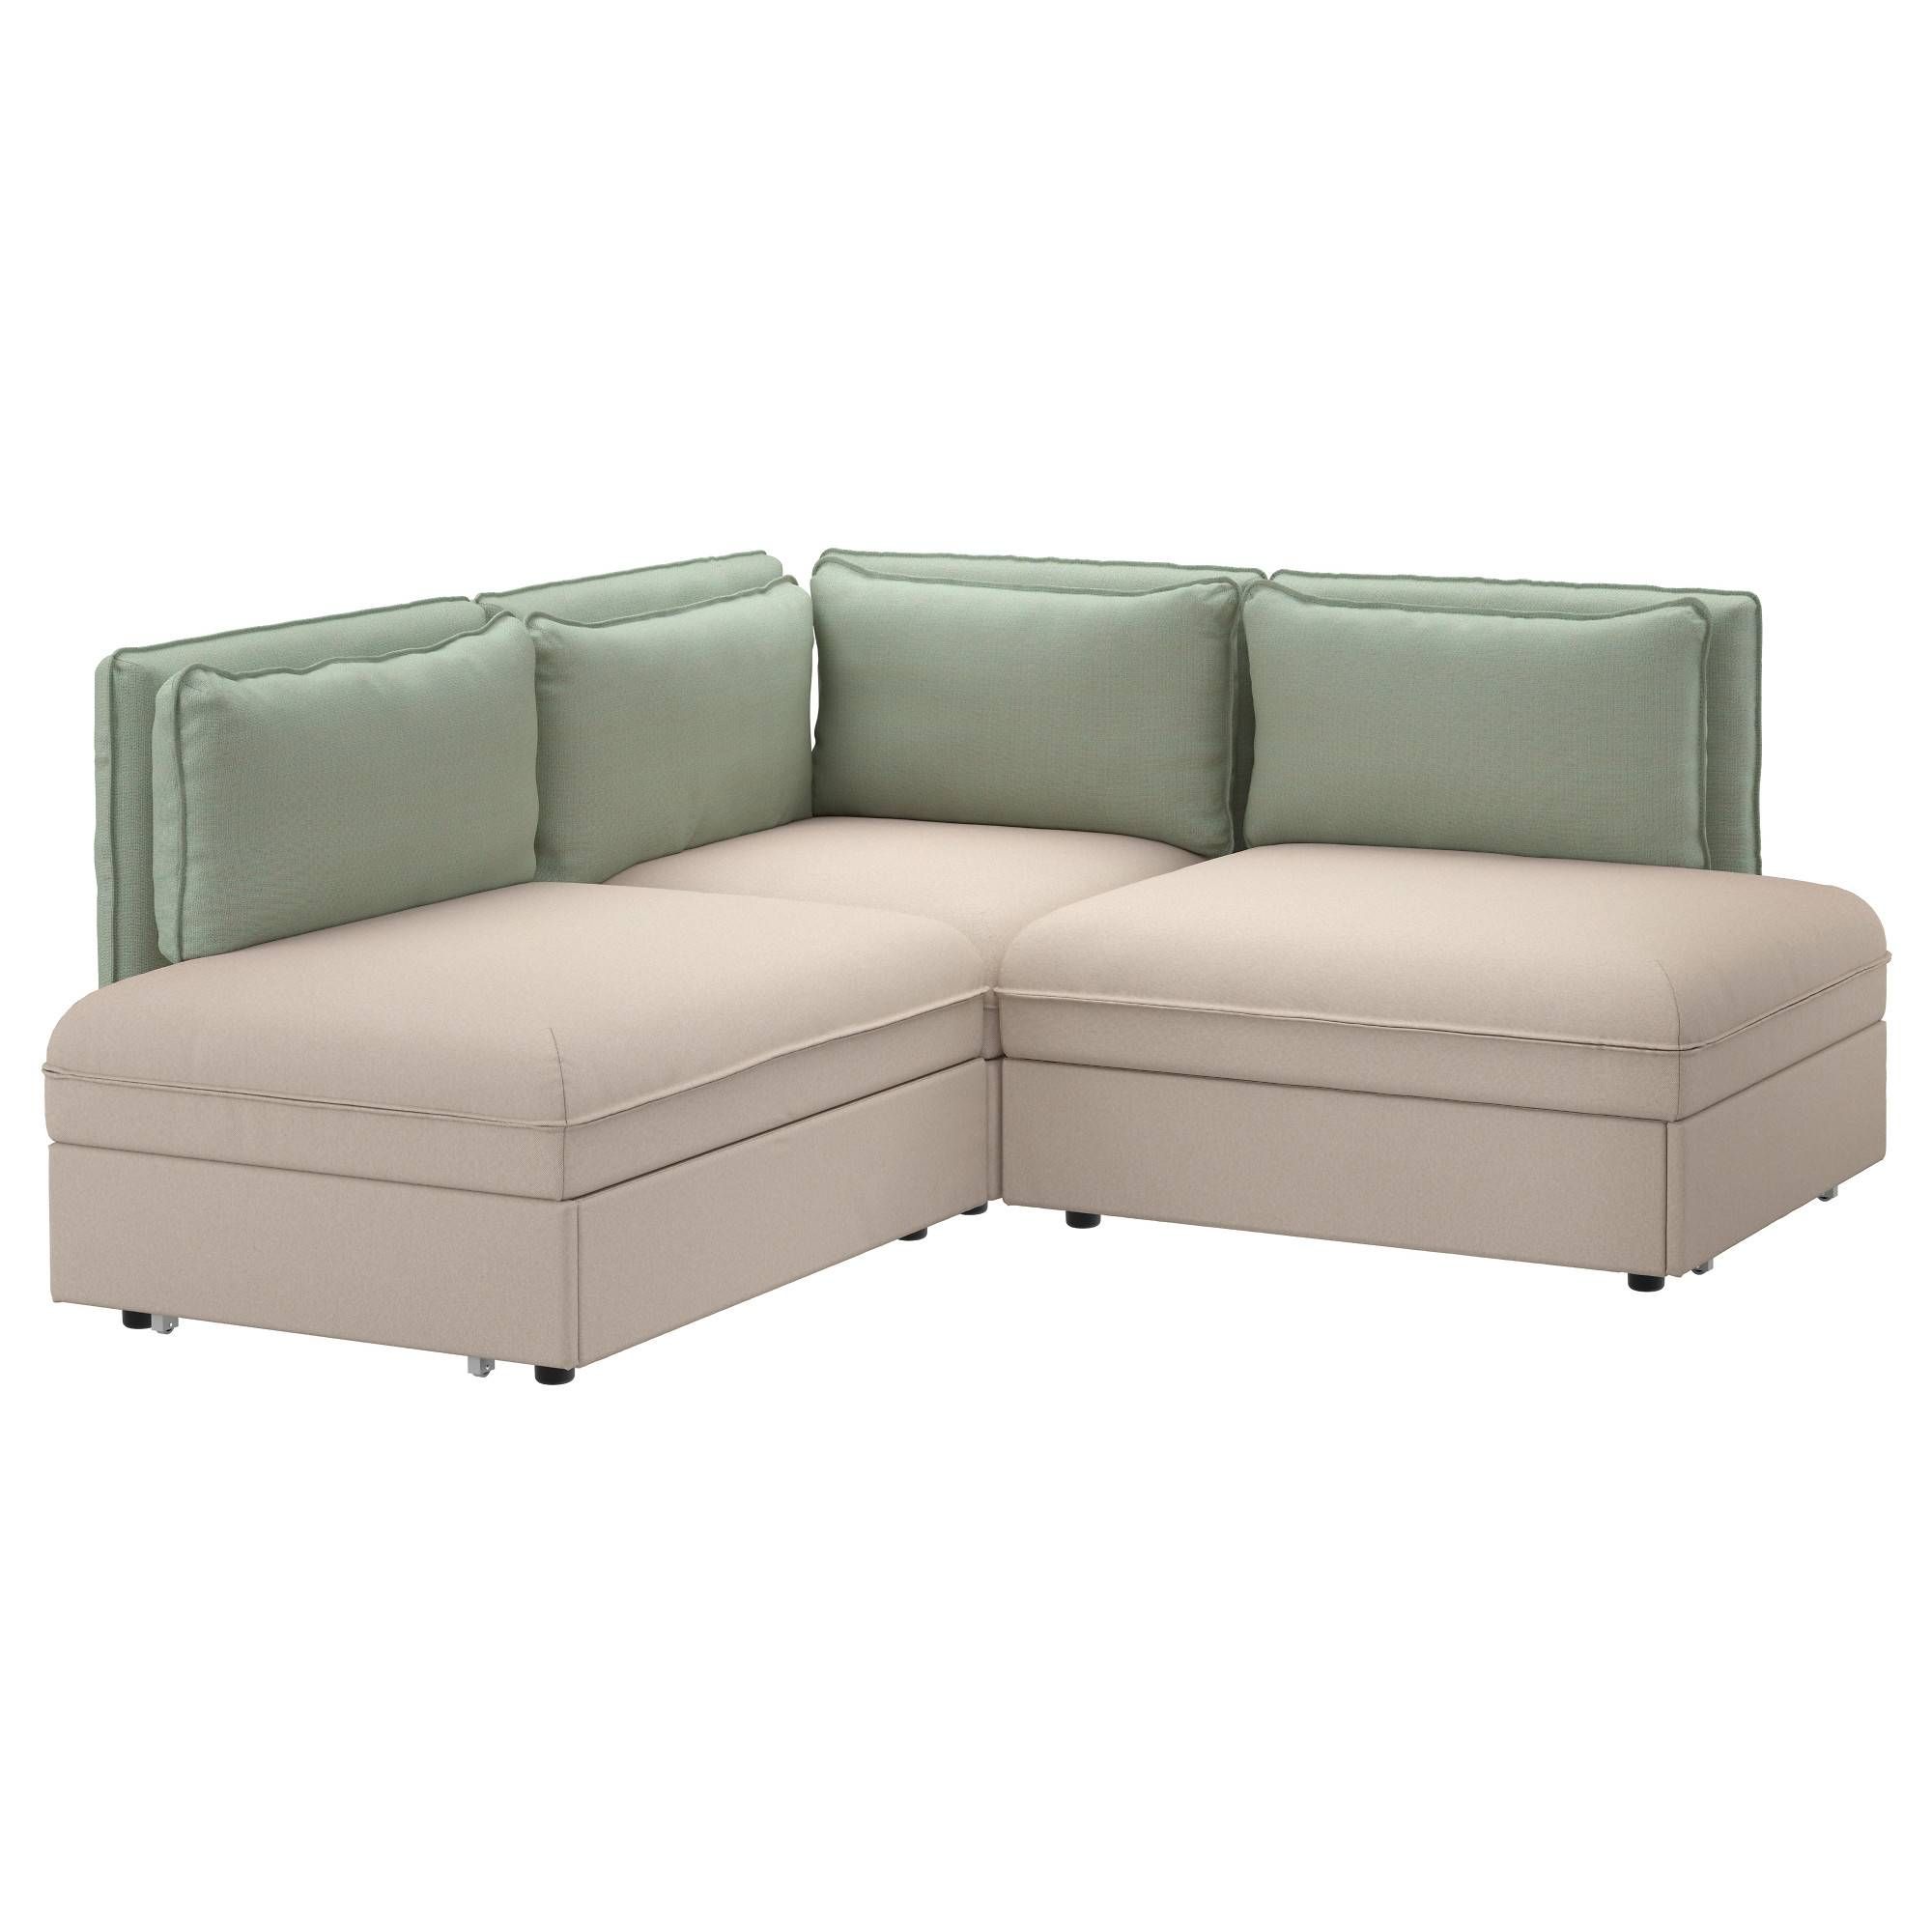 Sleeper Sofas Chair Beds Ikea With Single Chair Sofa Bed 